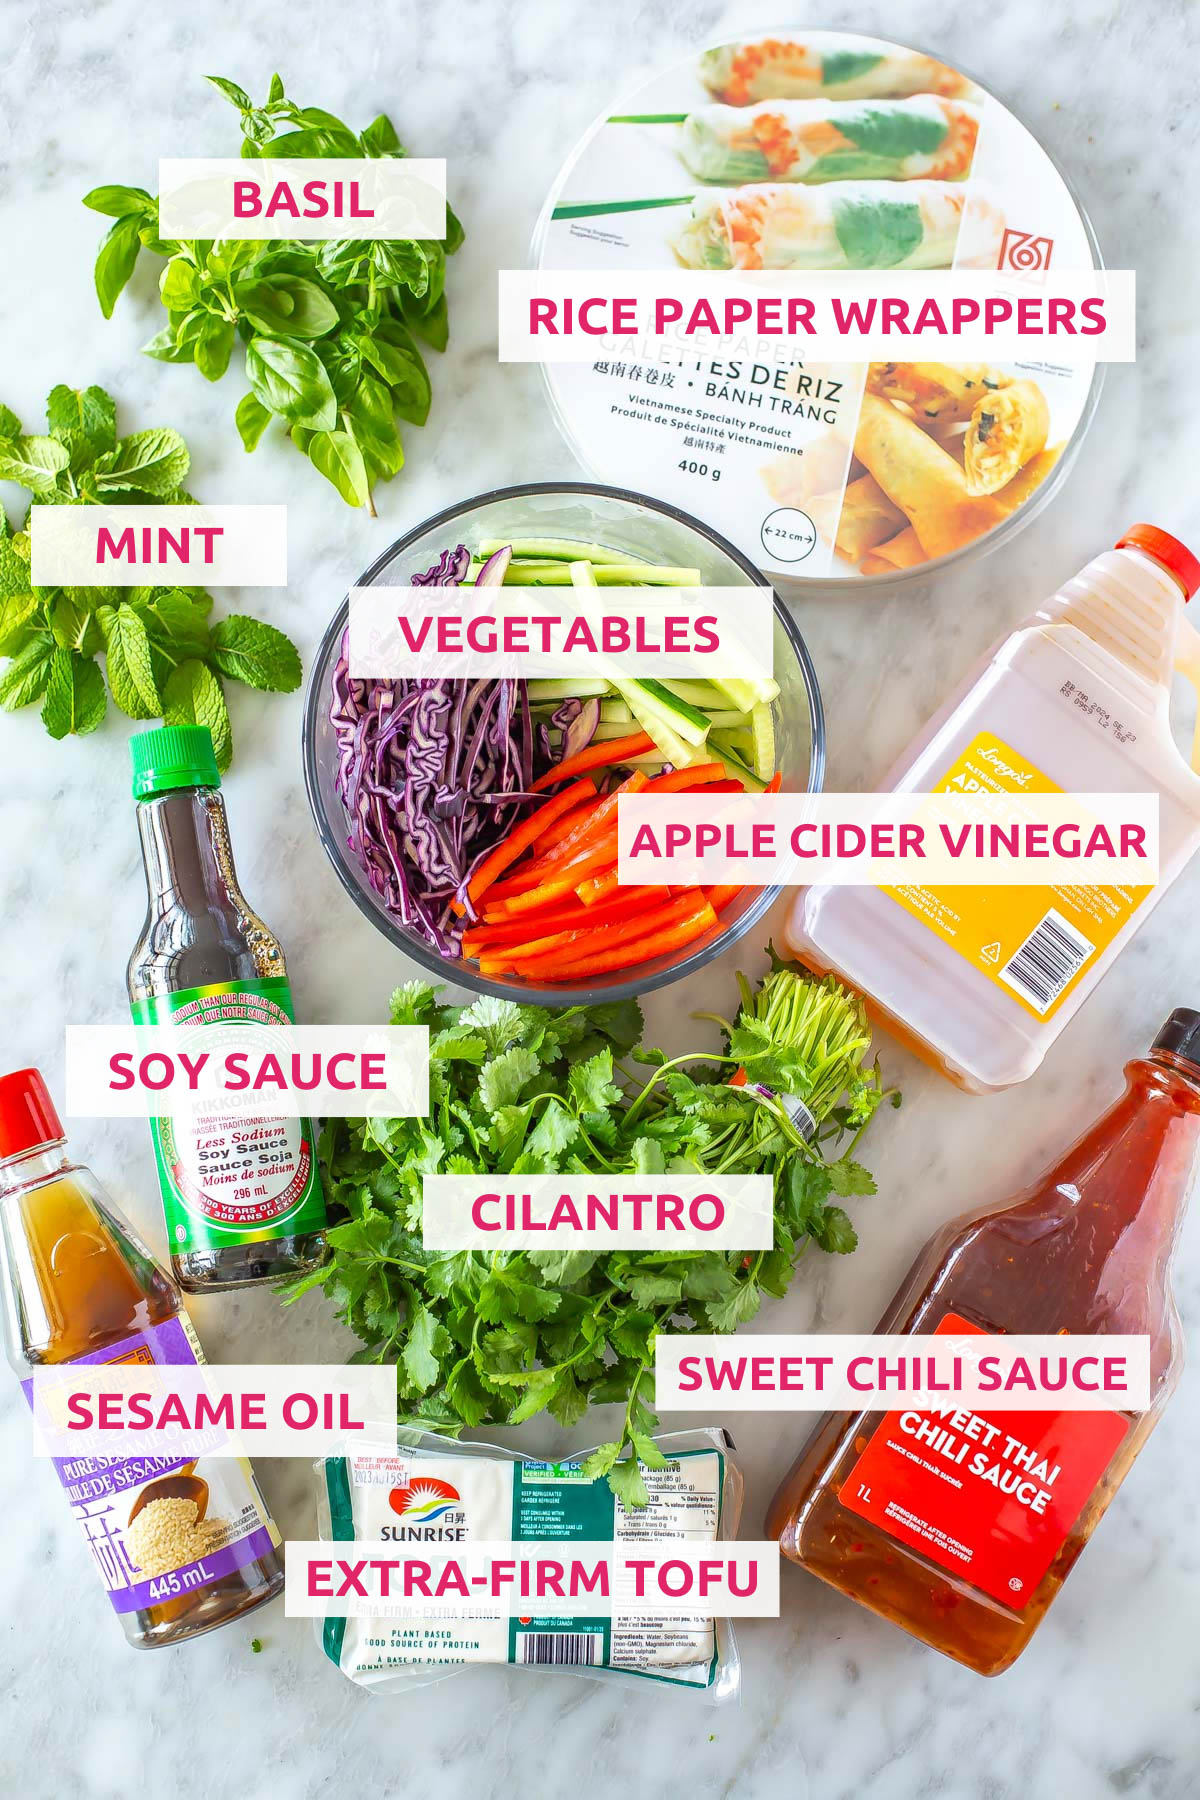 Ingredients for summer rolls: rice paper wrappers, veggies, basil, mint, apple cider vinegar, soy sauce, sesame oil, cilantro, tofu and sweet chili sauce.